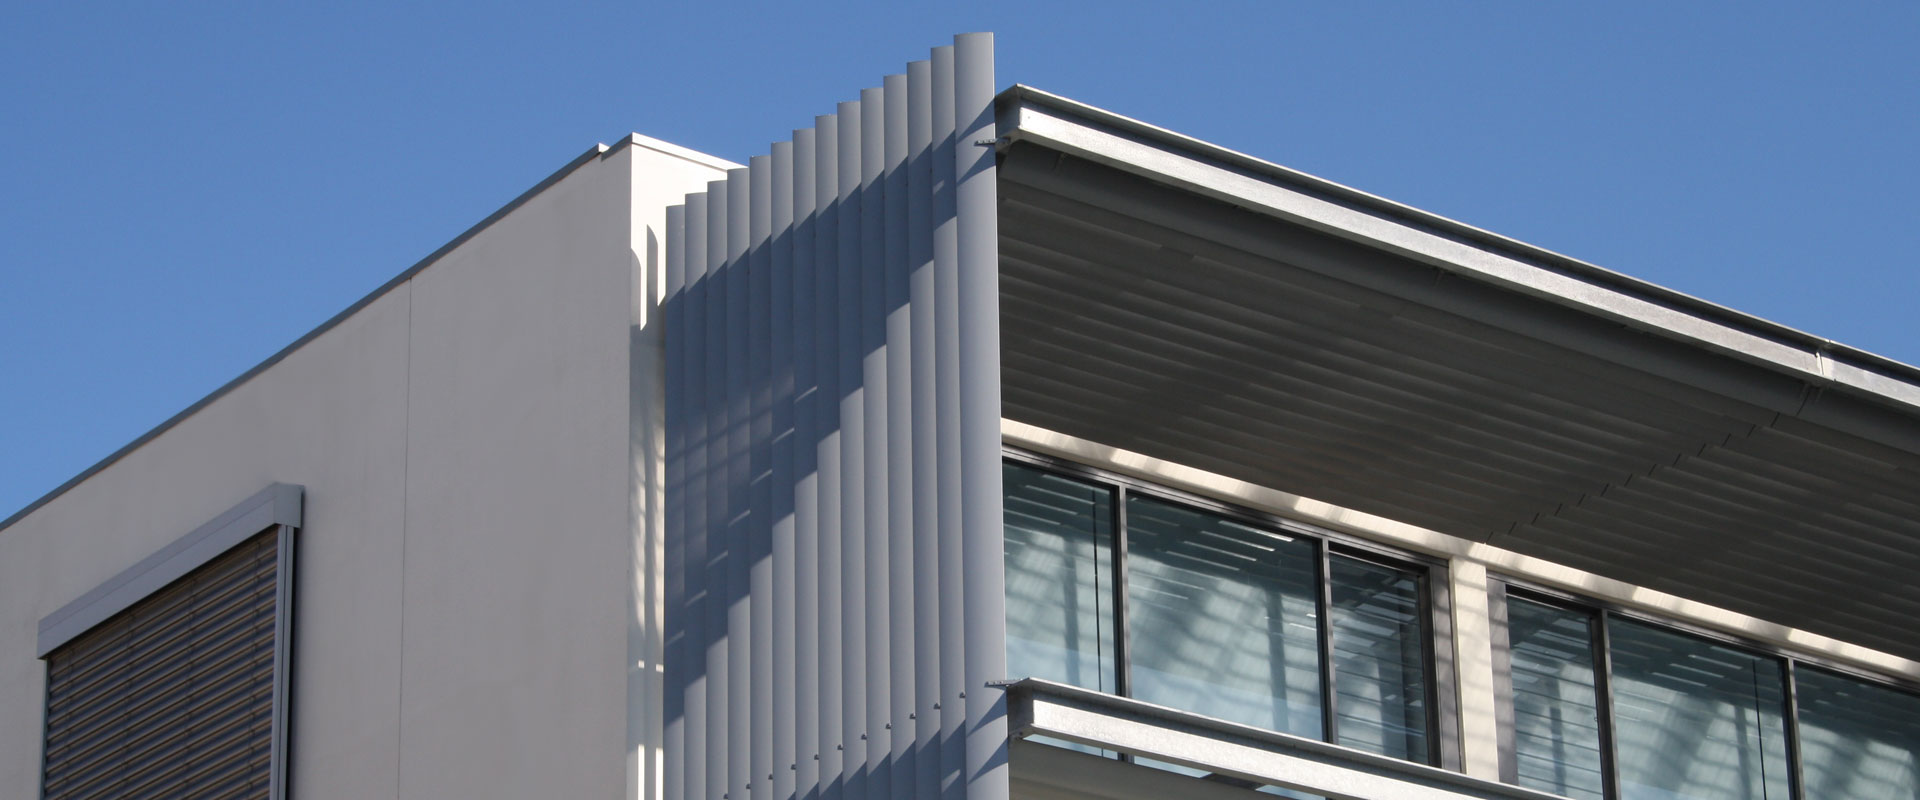 Maxim Louvres Brisbane by Dove Industry